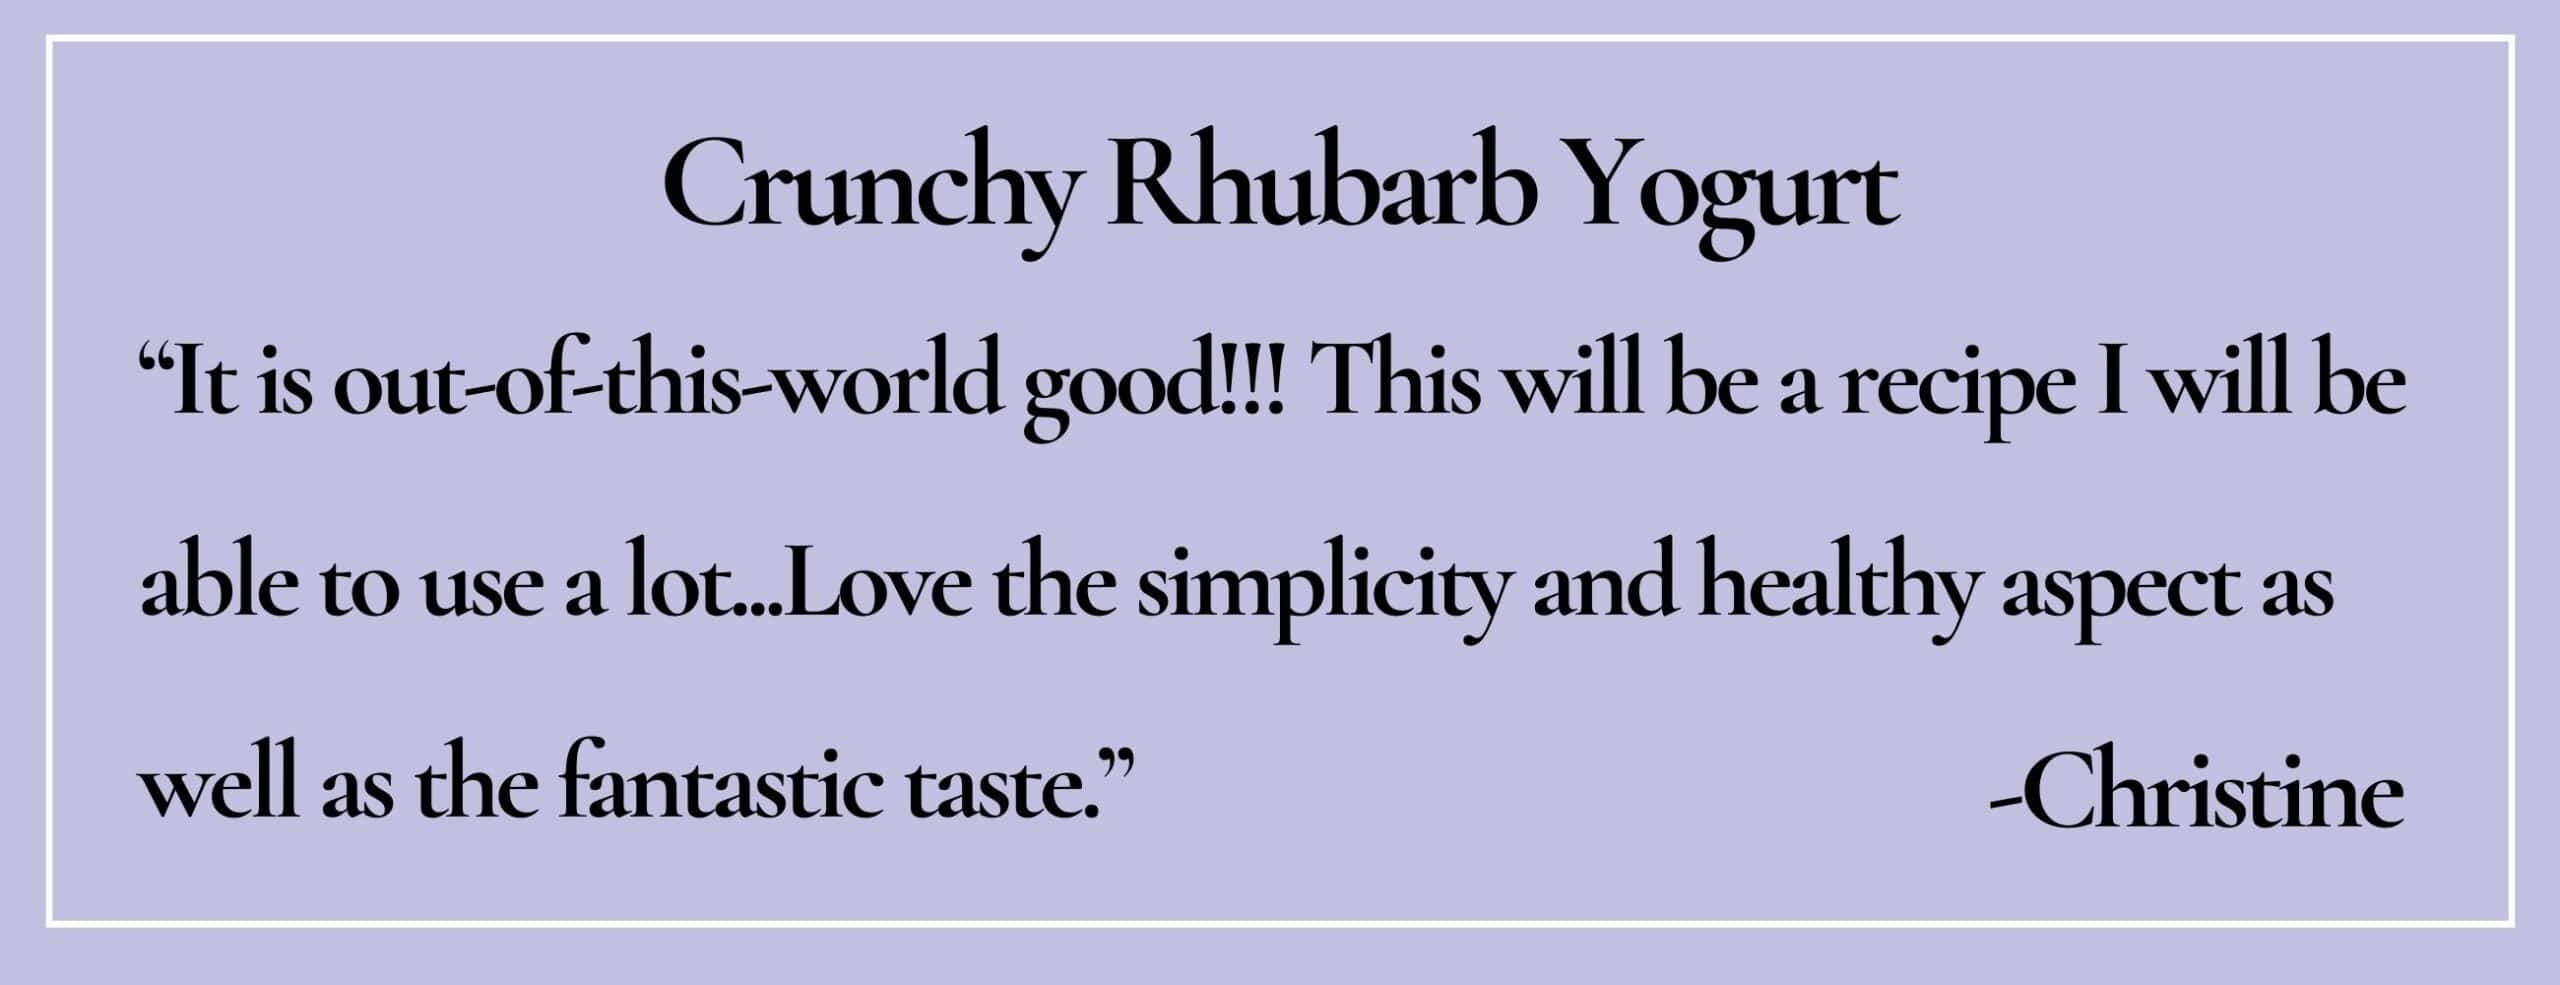 Text box with paraphrase: Love the simplicity and healthy aspect as well as the fantastic taste. -Christine